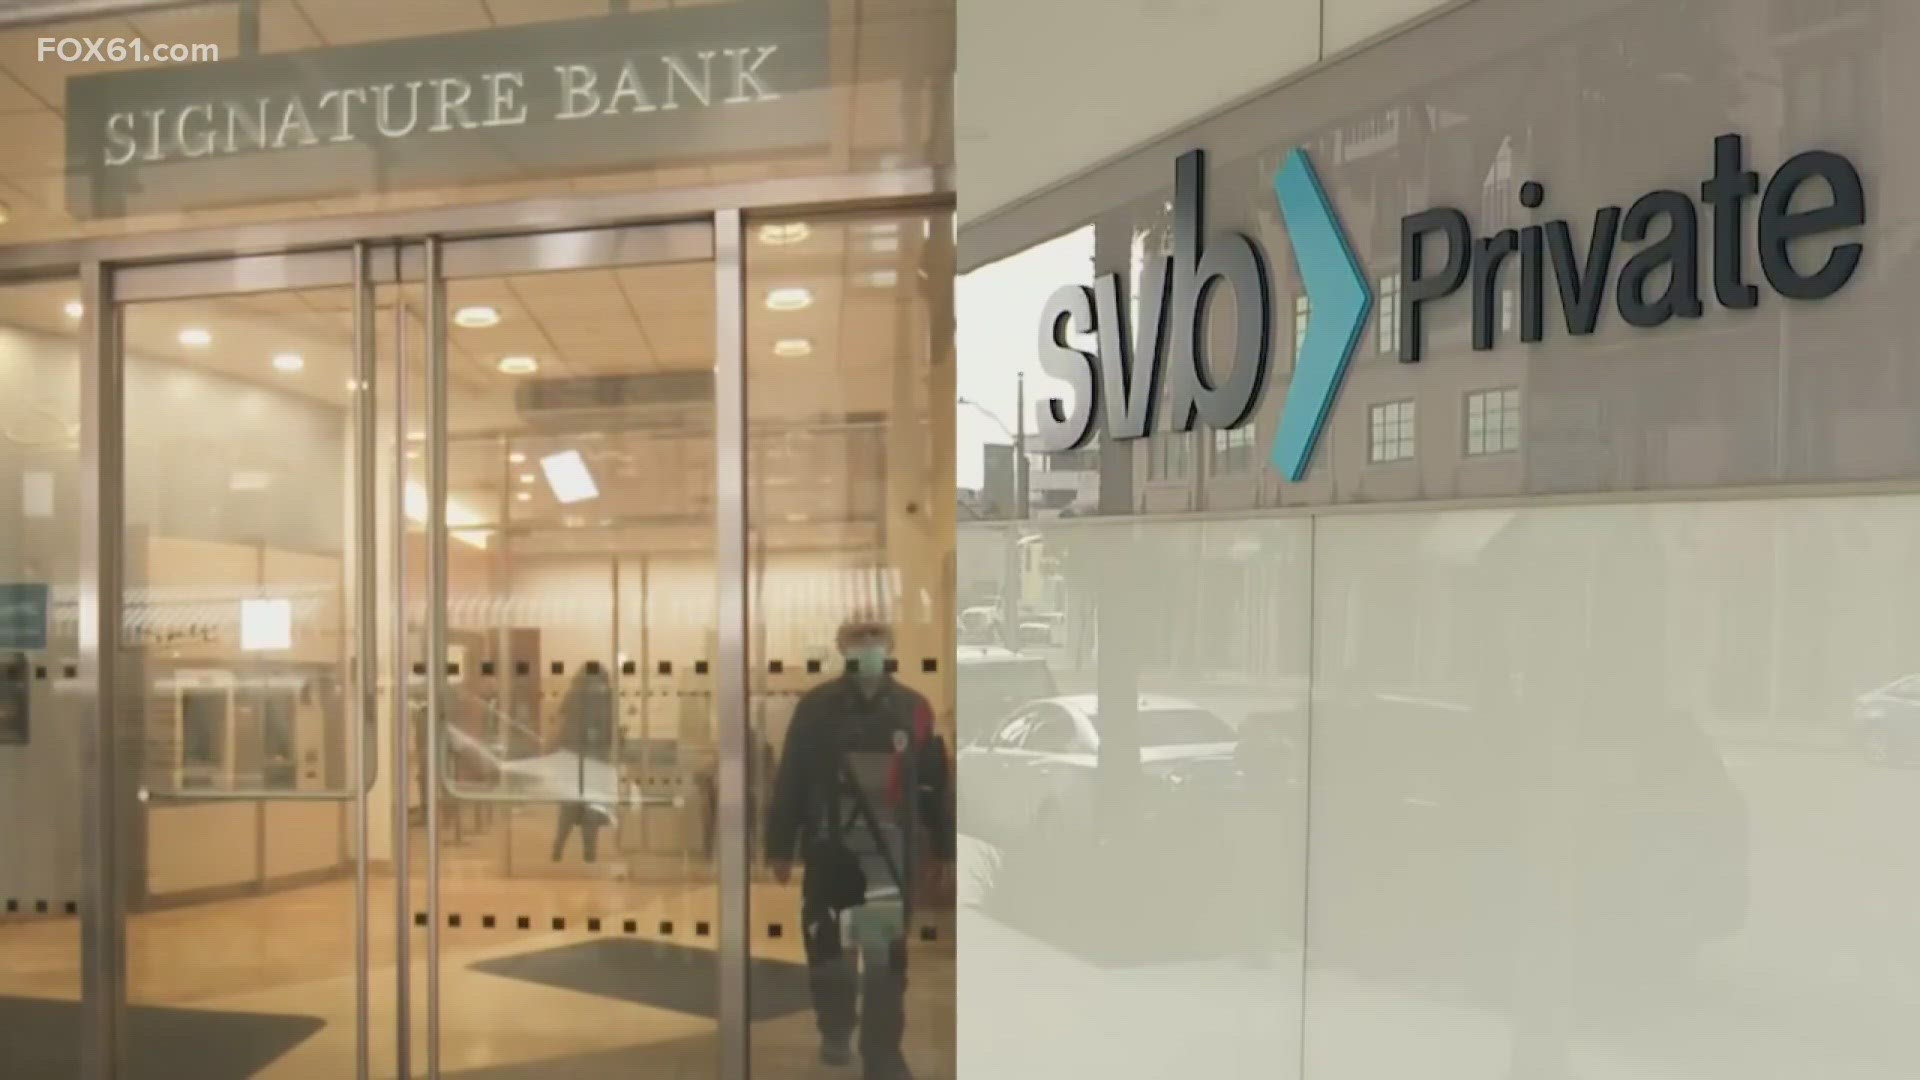 The failures of the two banks raise questions about the impact they may have in Connecticut.